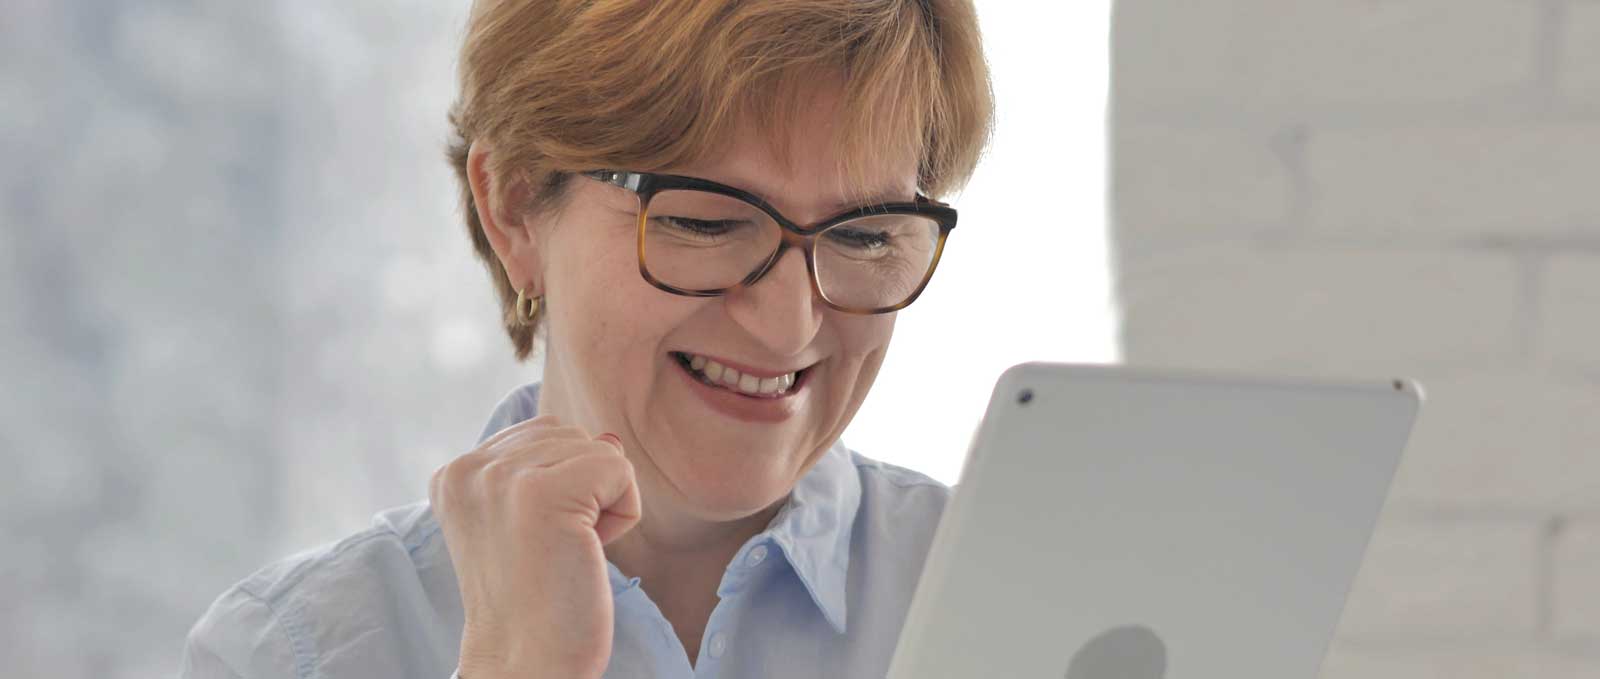 Middle-aged woman reading engaging marketing content on her tablet